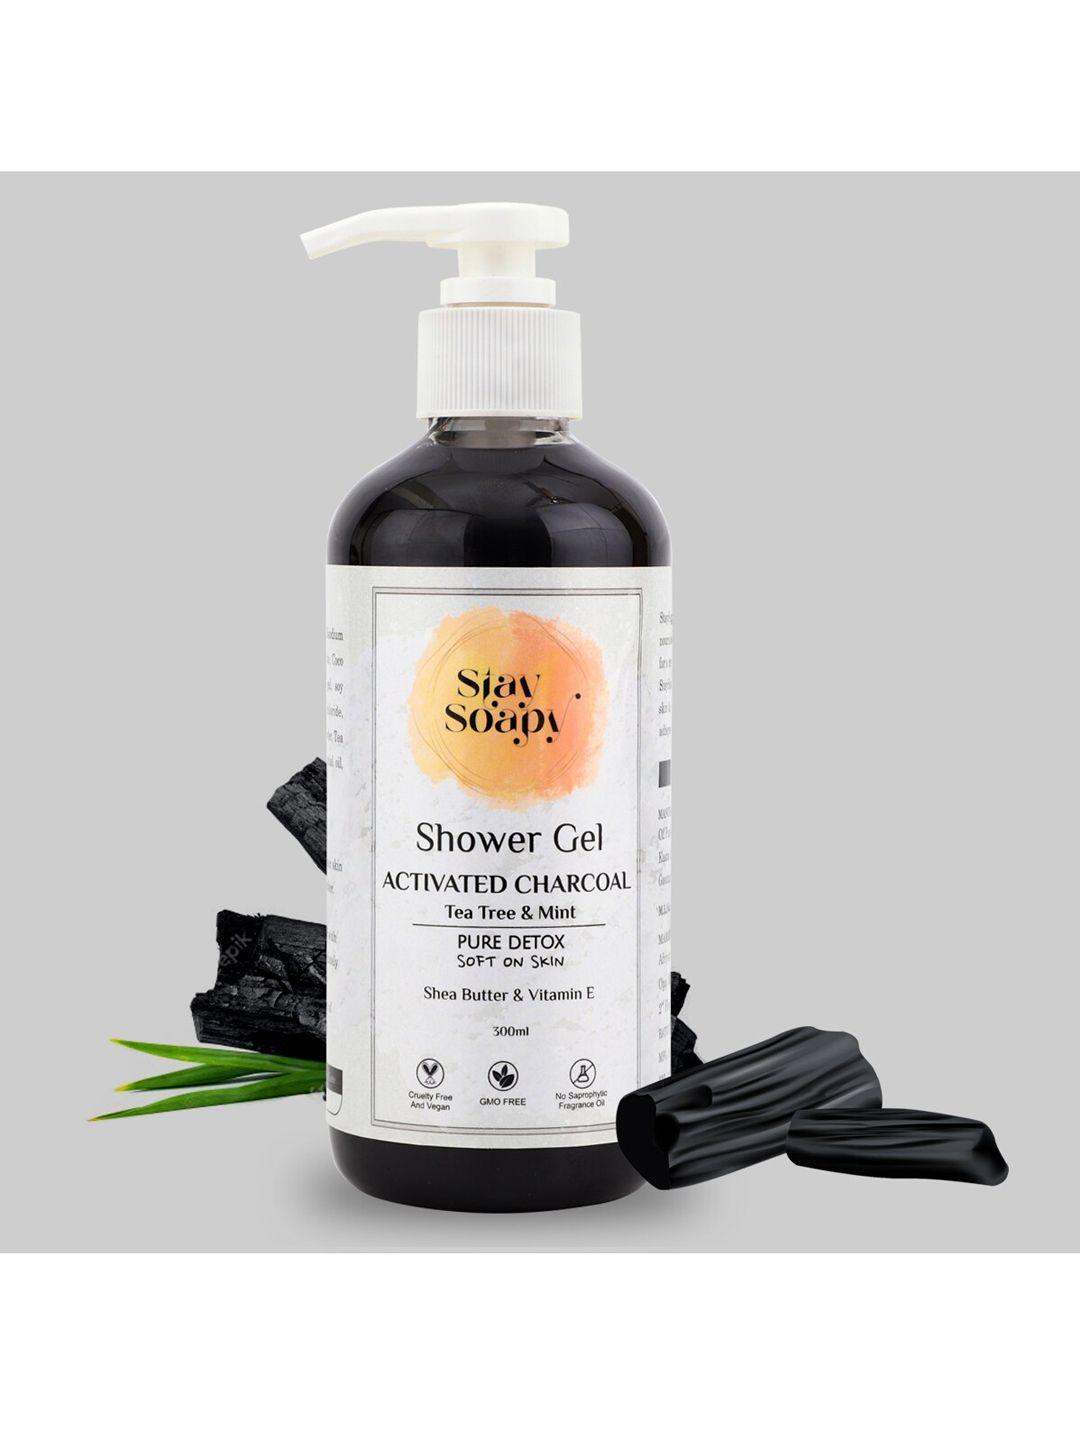 stay soapy pure detox activated charcoal shower gel with tea tree & mint - 300 ml